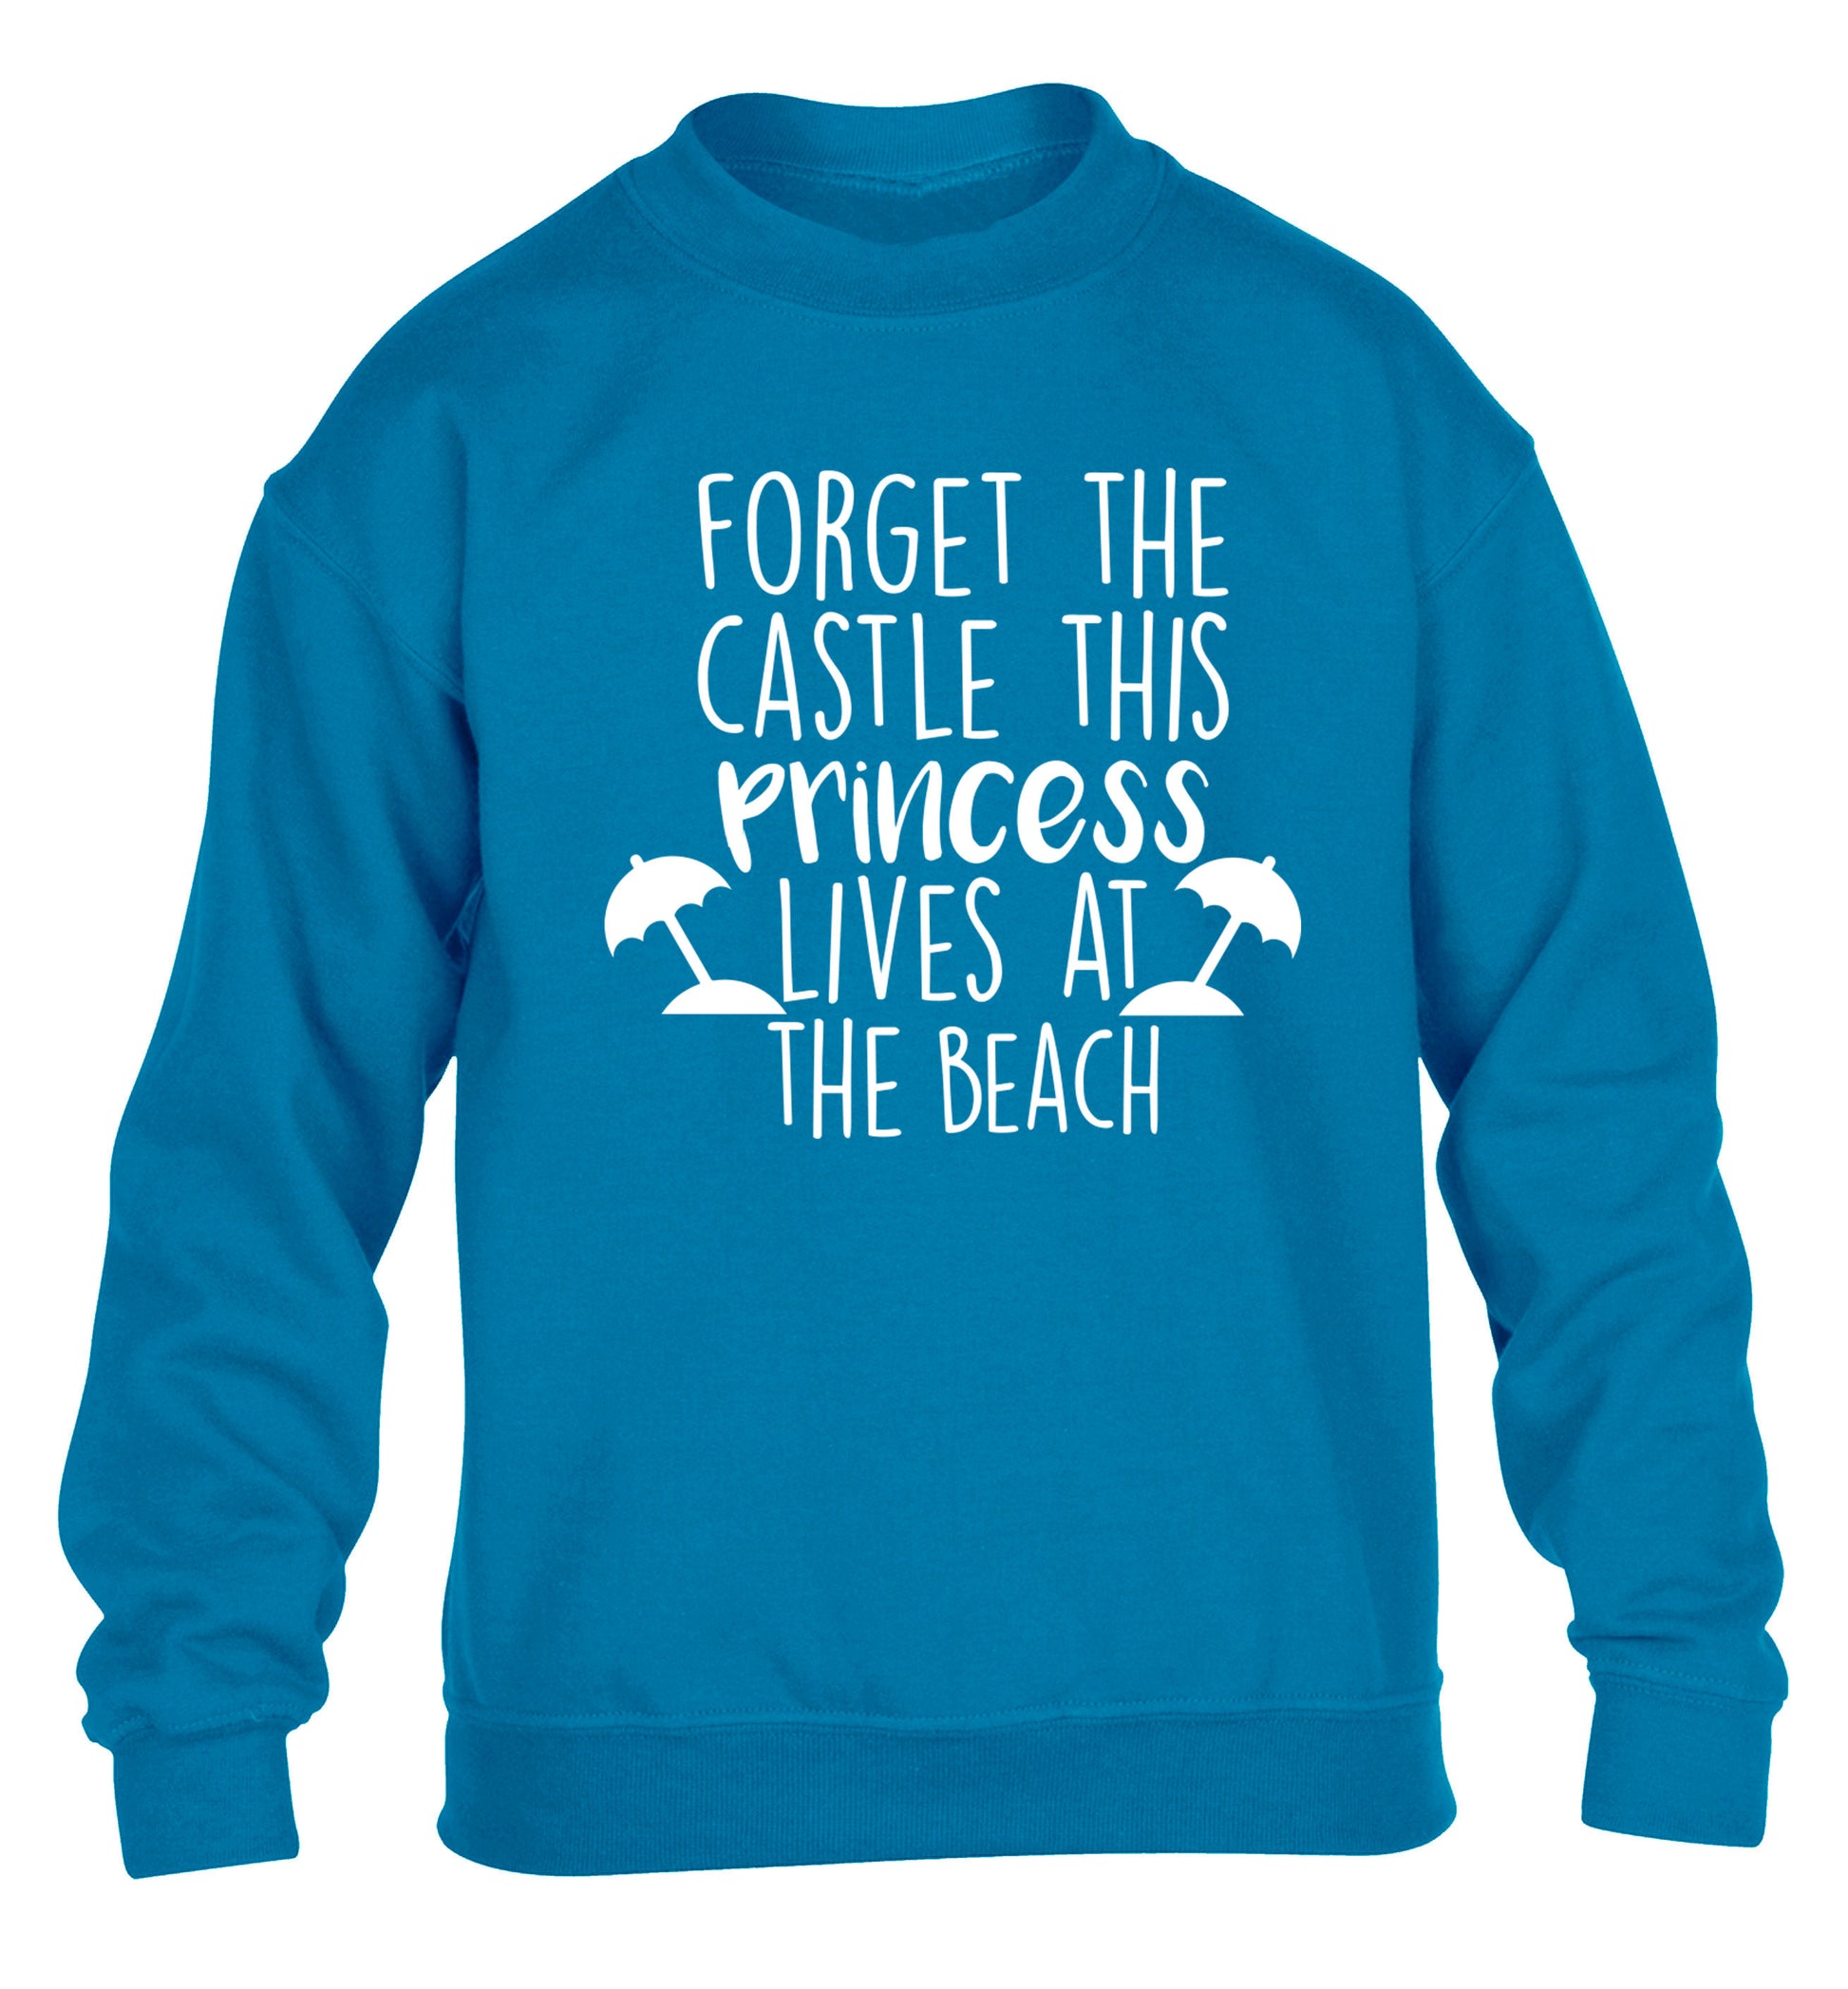 Forget the castle this princess lives at the beach children's blue sweater 12-14 Years